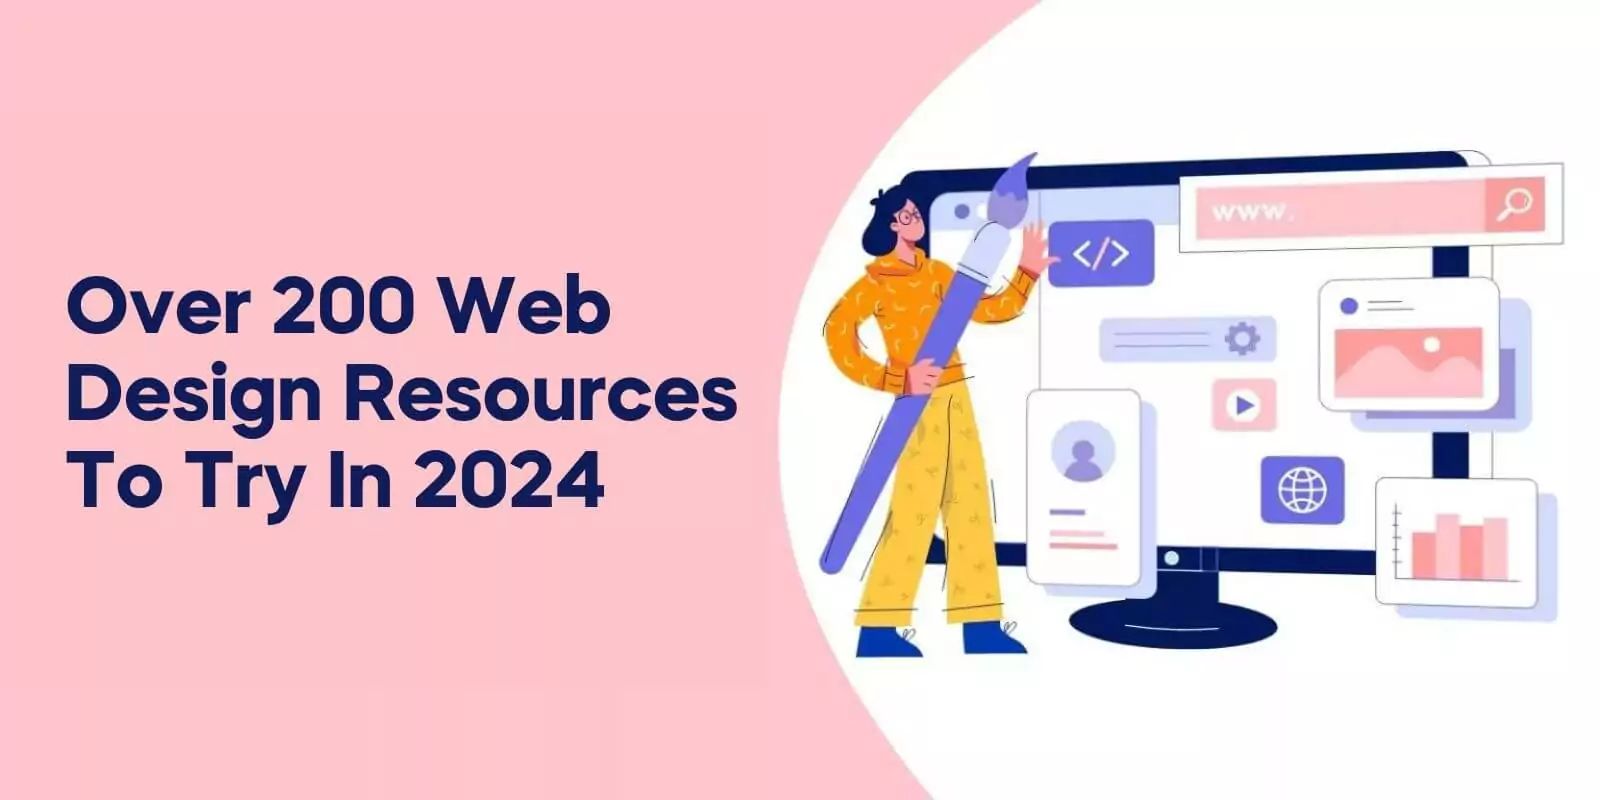 Over 200 Web Design Resources to Try in 2024